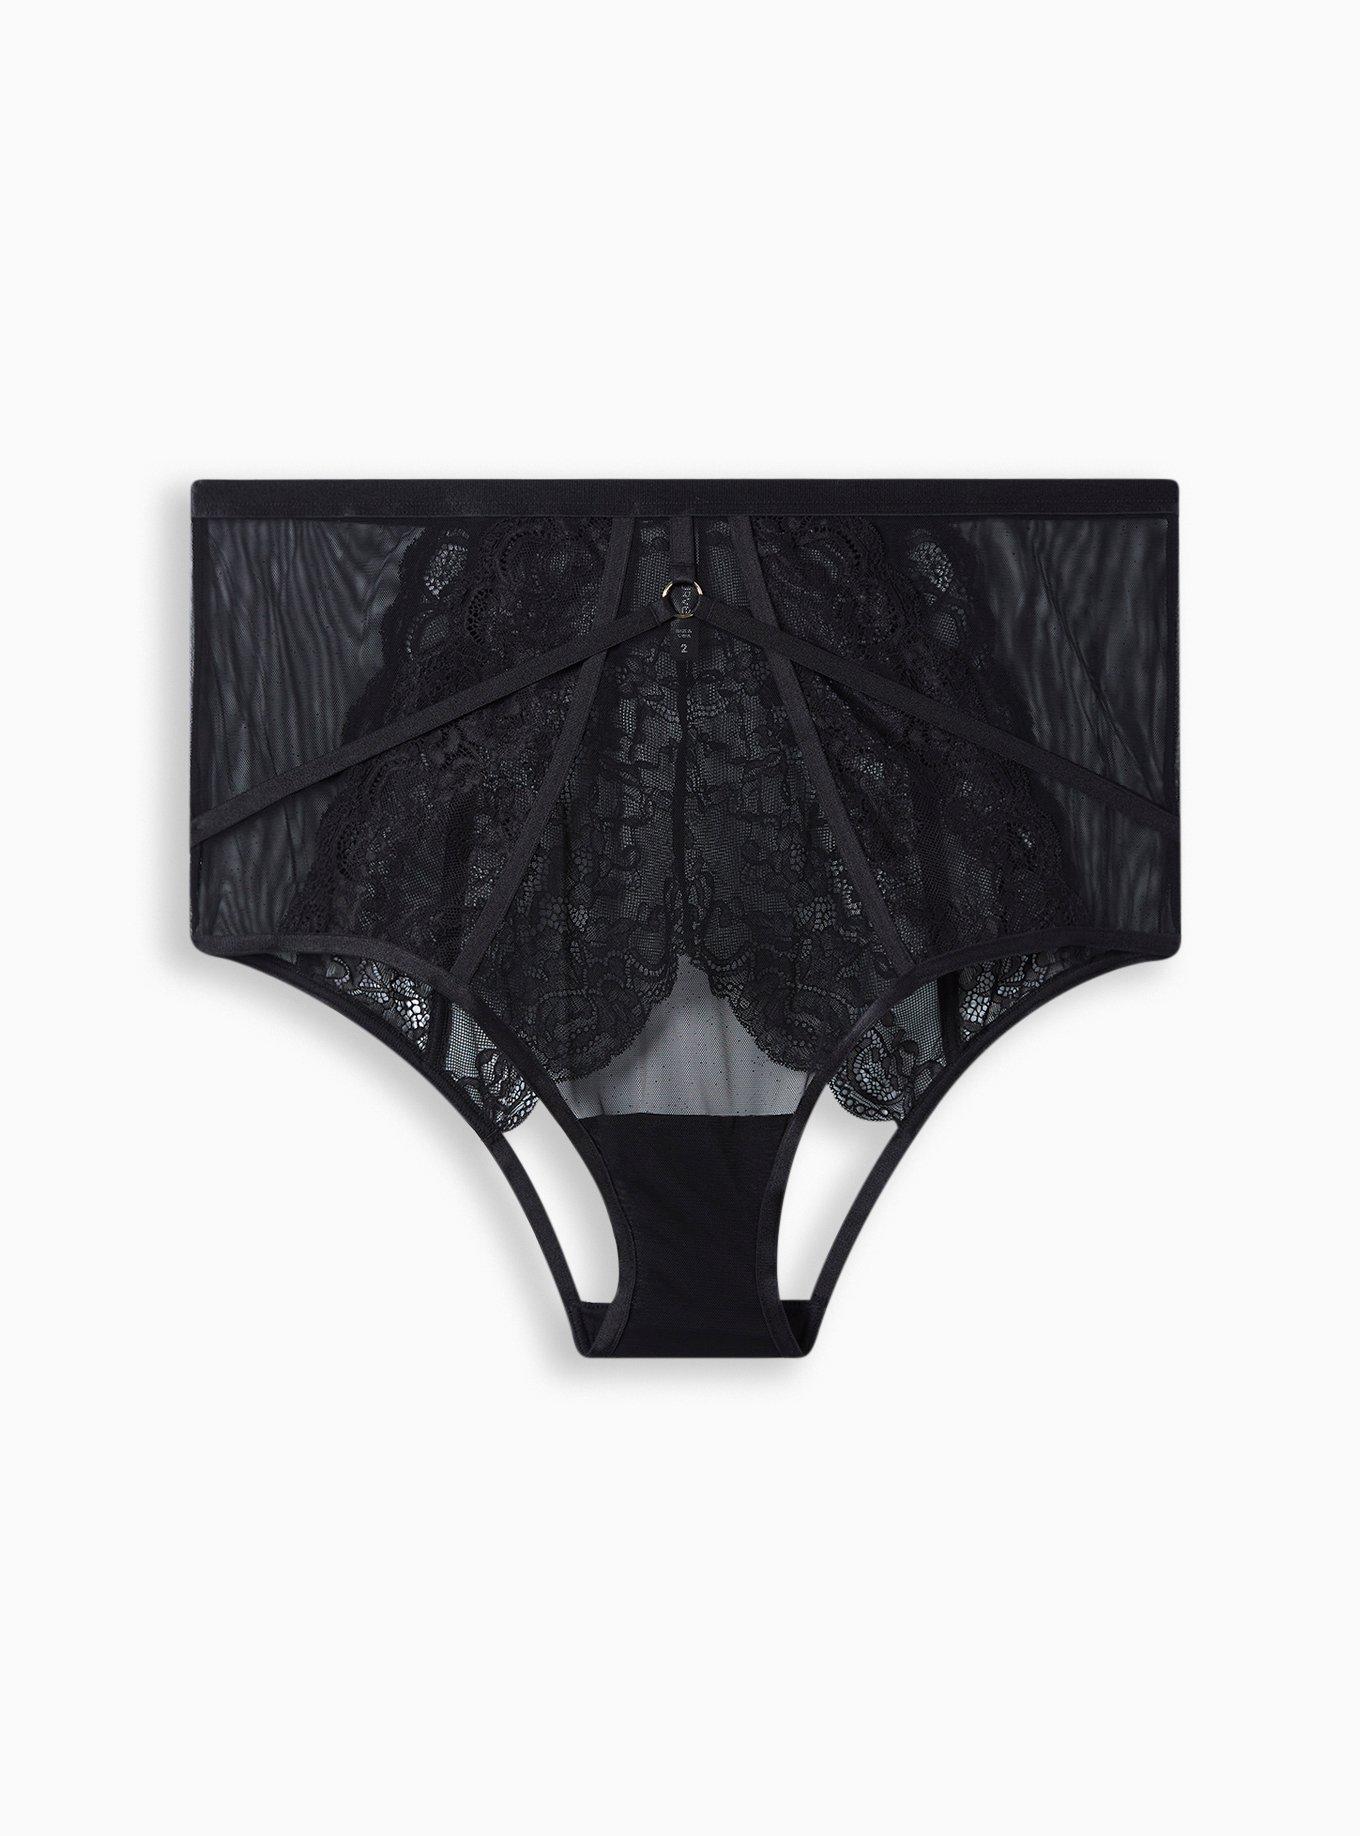 Plus Size - Lace High Waist Cheeky Panty With Open Bum - Torrid